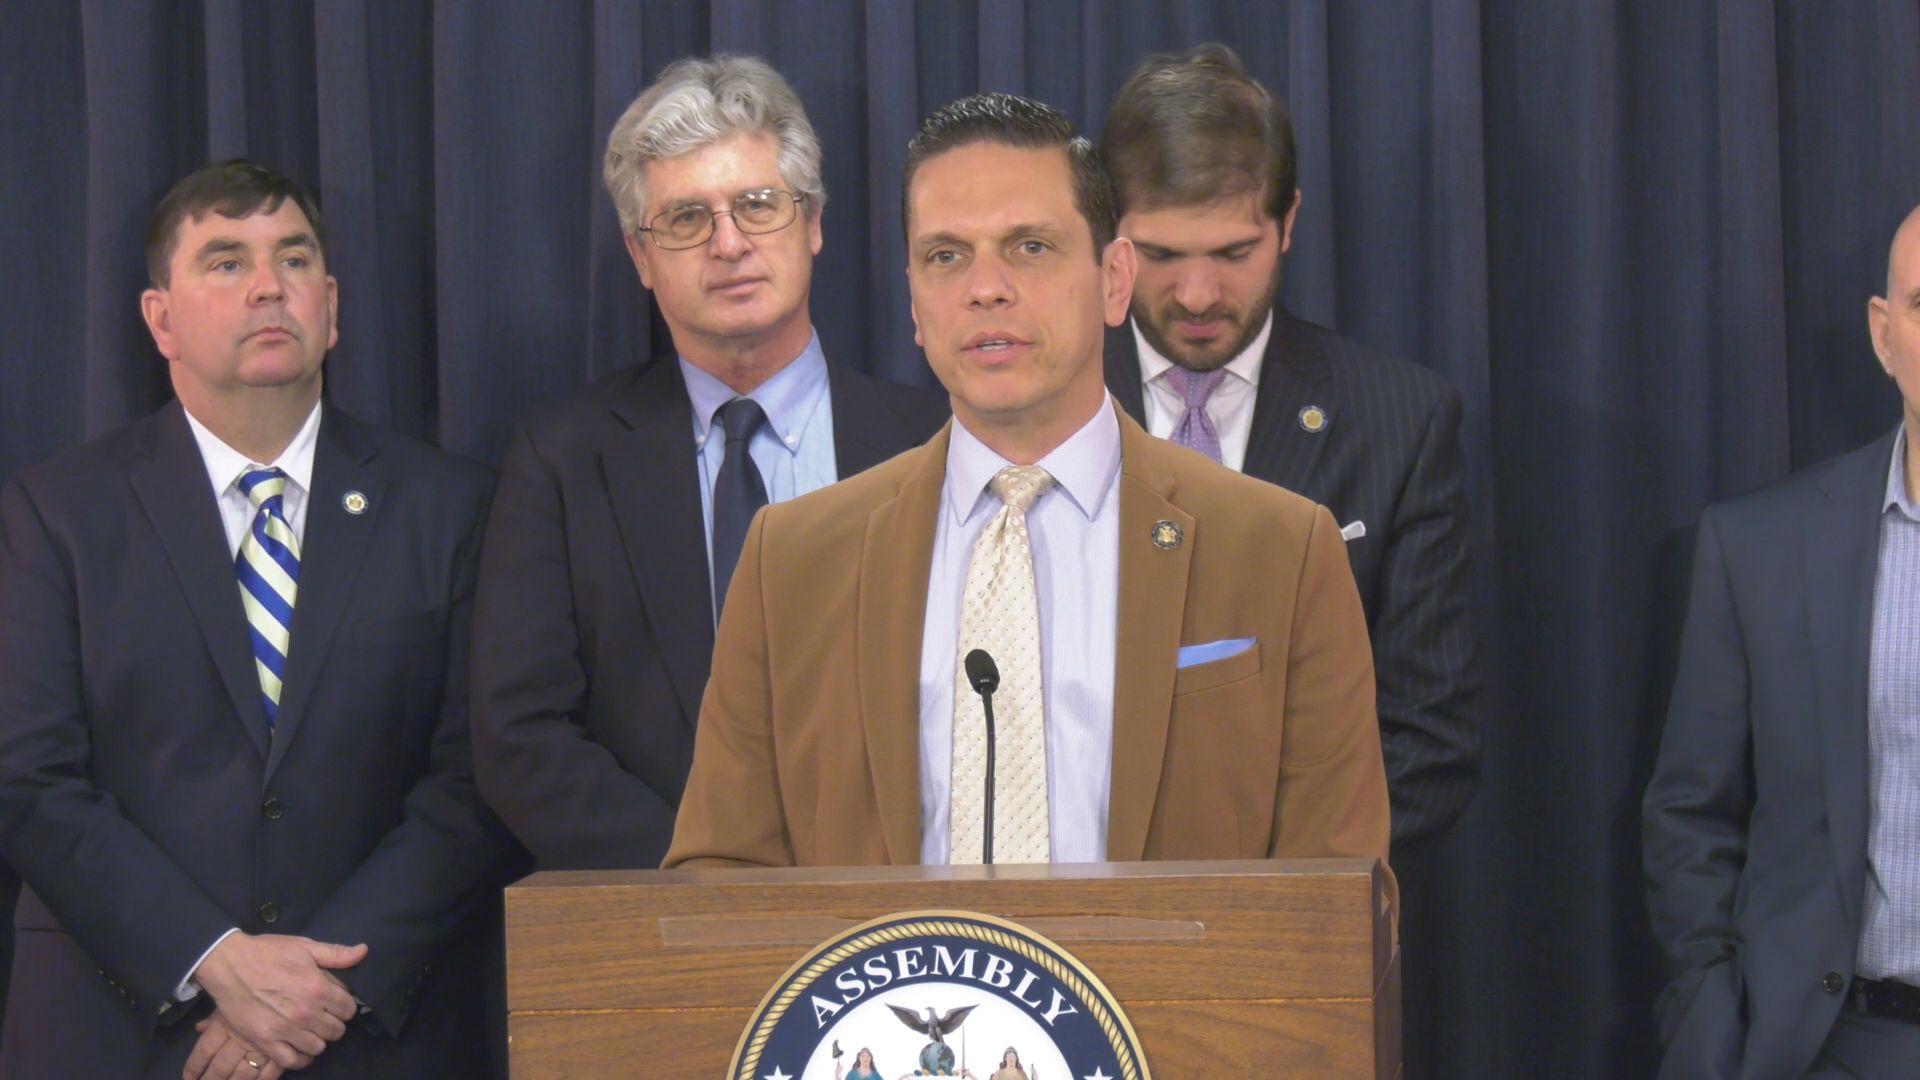 Assemblyman Santabarbara Calls for Funding for Higher Education Students with Disabilities